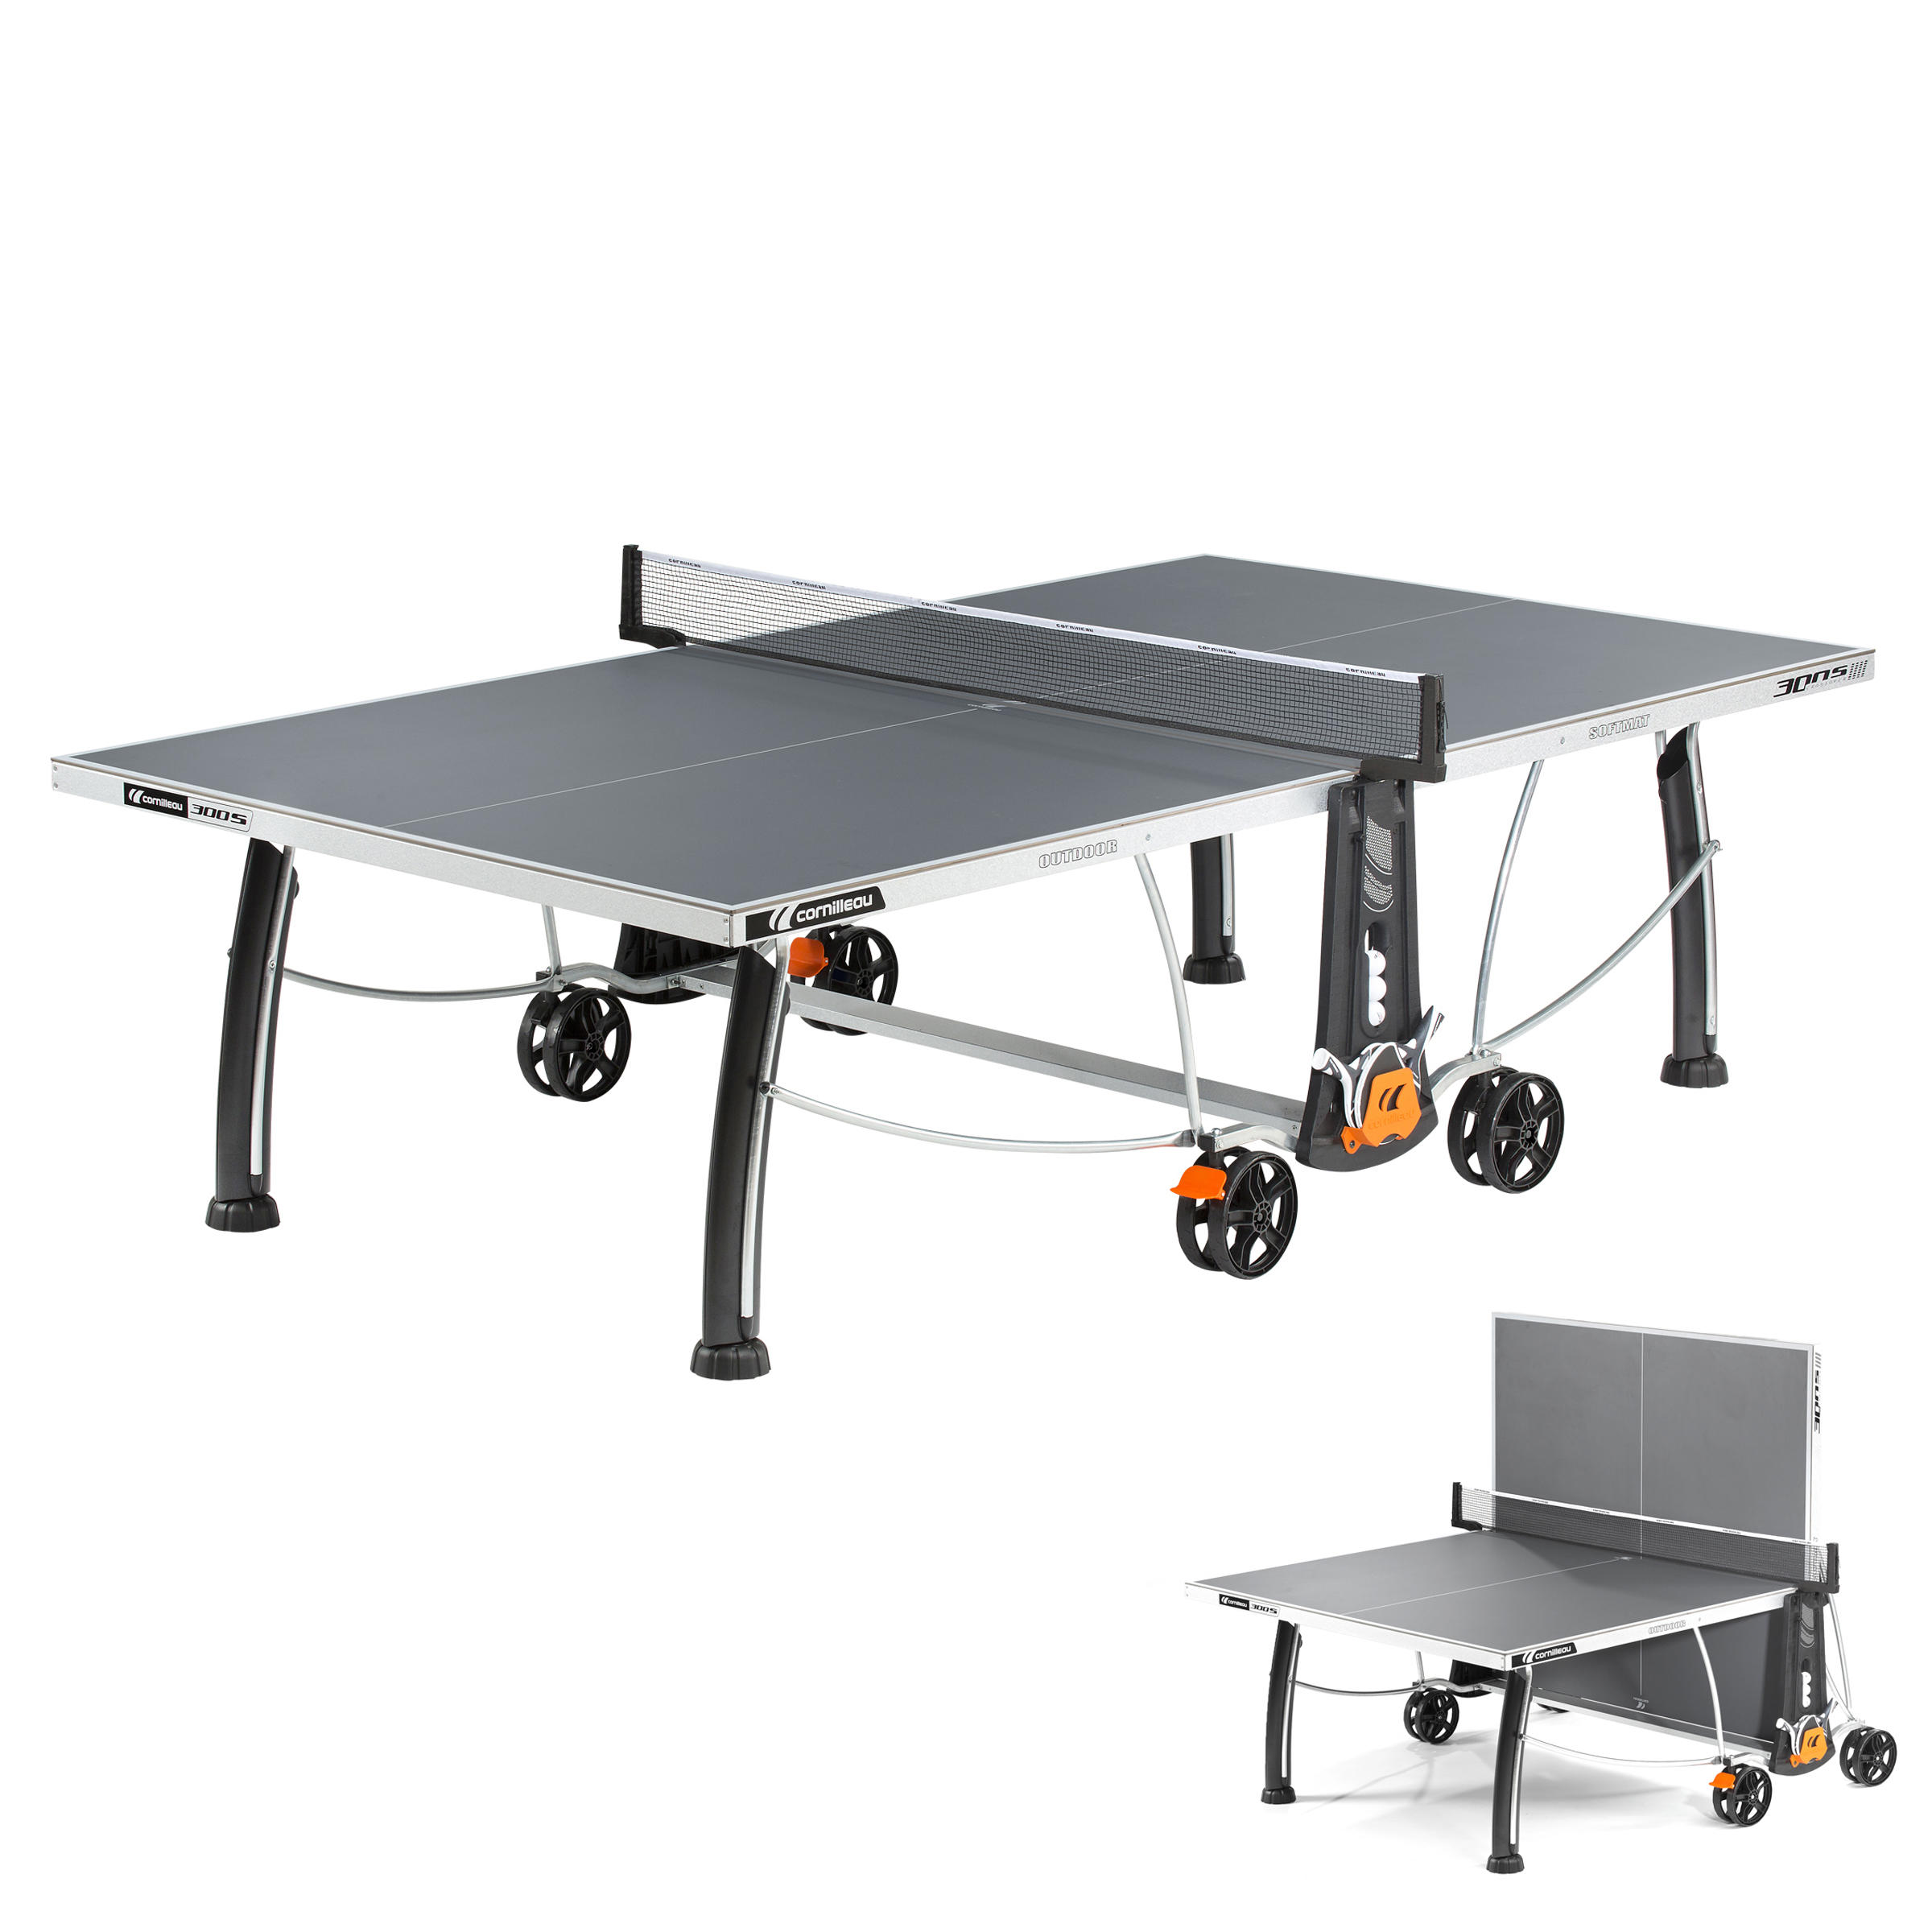 300 S Crossover Outdoor Table Tennis 